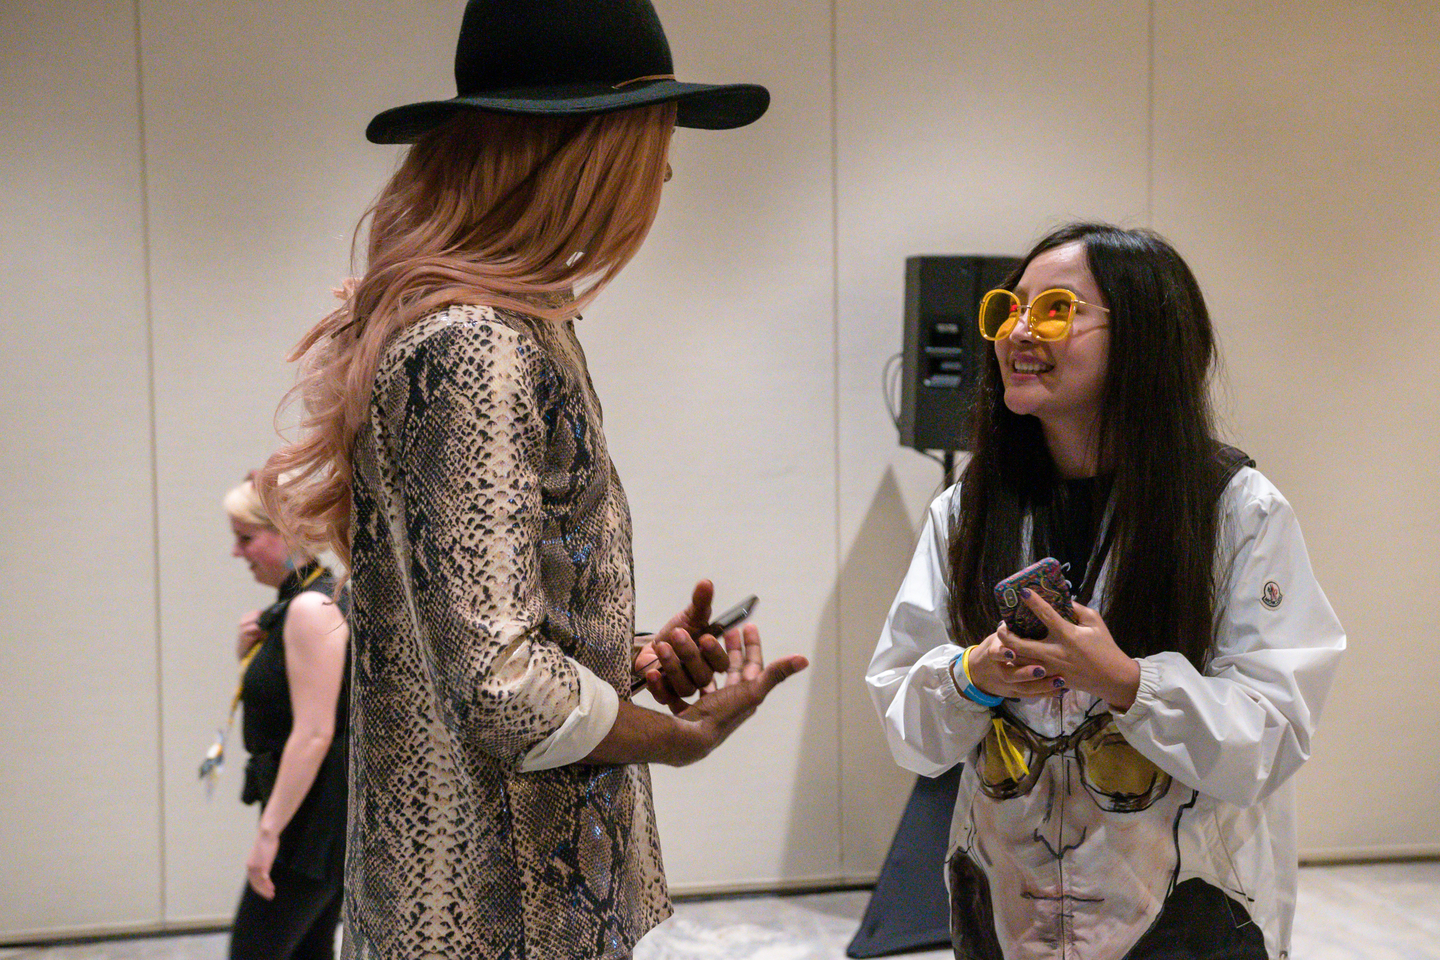 Dev Seldon speaks with an attendee at Blurred Lines: Beauty in a Gender Fluid World – Photo by Anthony Moreno